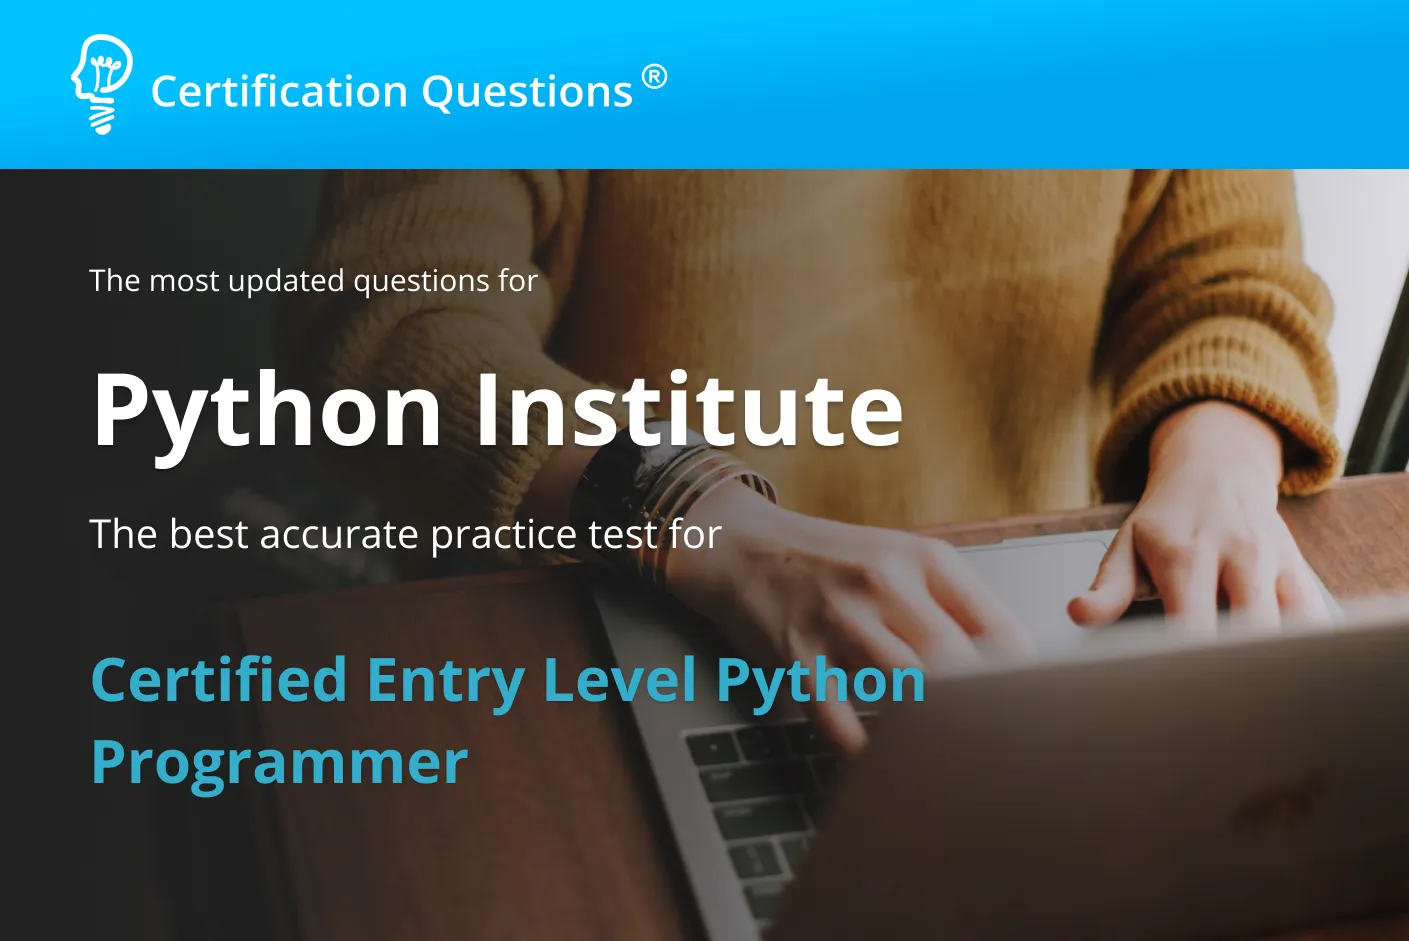 This image represents the Certified entry level python programmer